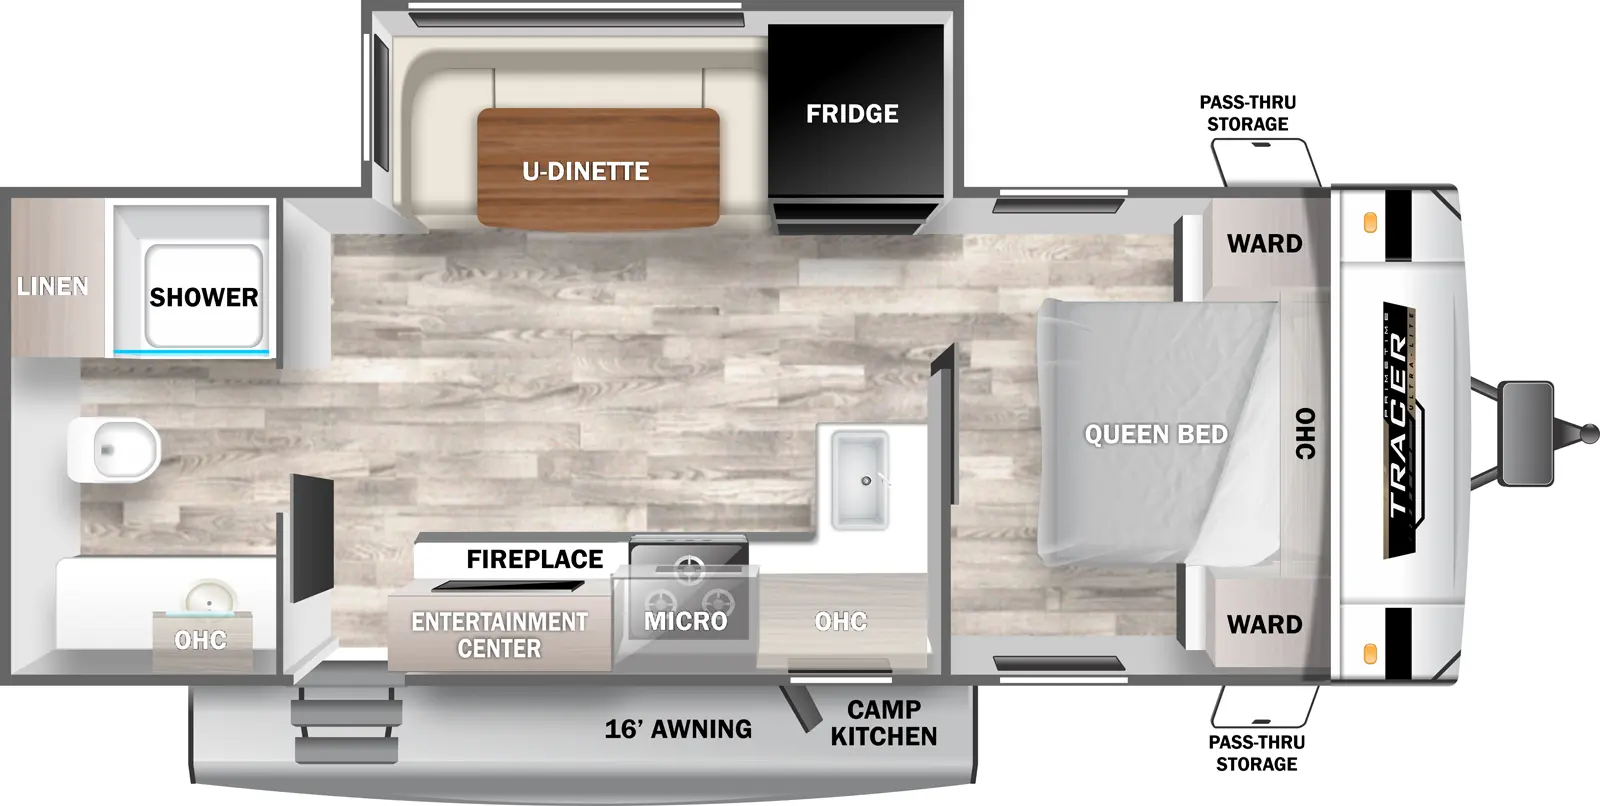 The 23RBS has one entry and one slideout. Exterior features a camp kitchen, front passthrough storage, and a sixteen foot awning. Interior layout front to back: foot-facing queen bed with wardrobes on either side and overhead cabinets; off-door side slideout with refrigerator and u-dinette; kitchen counter with sink wraps from inner wall to door side with cooktop, overhead cabinets, microwave, entertainment center and fireplace below next to the entry steps; rear full bathroom with linen closet, and overhead cabinet above sink.